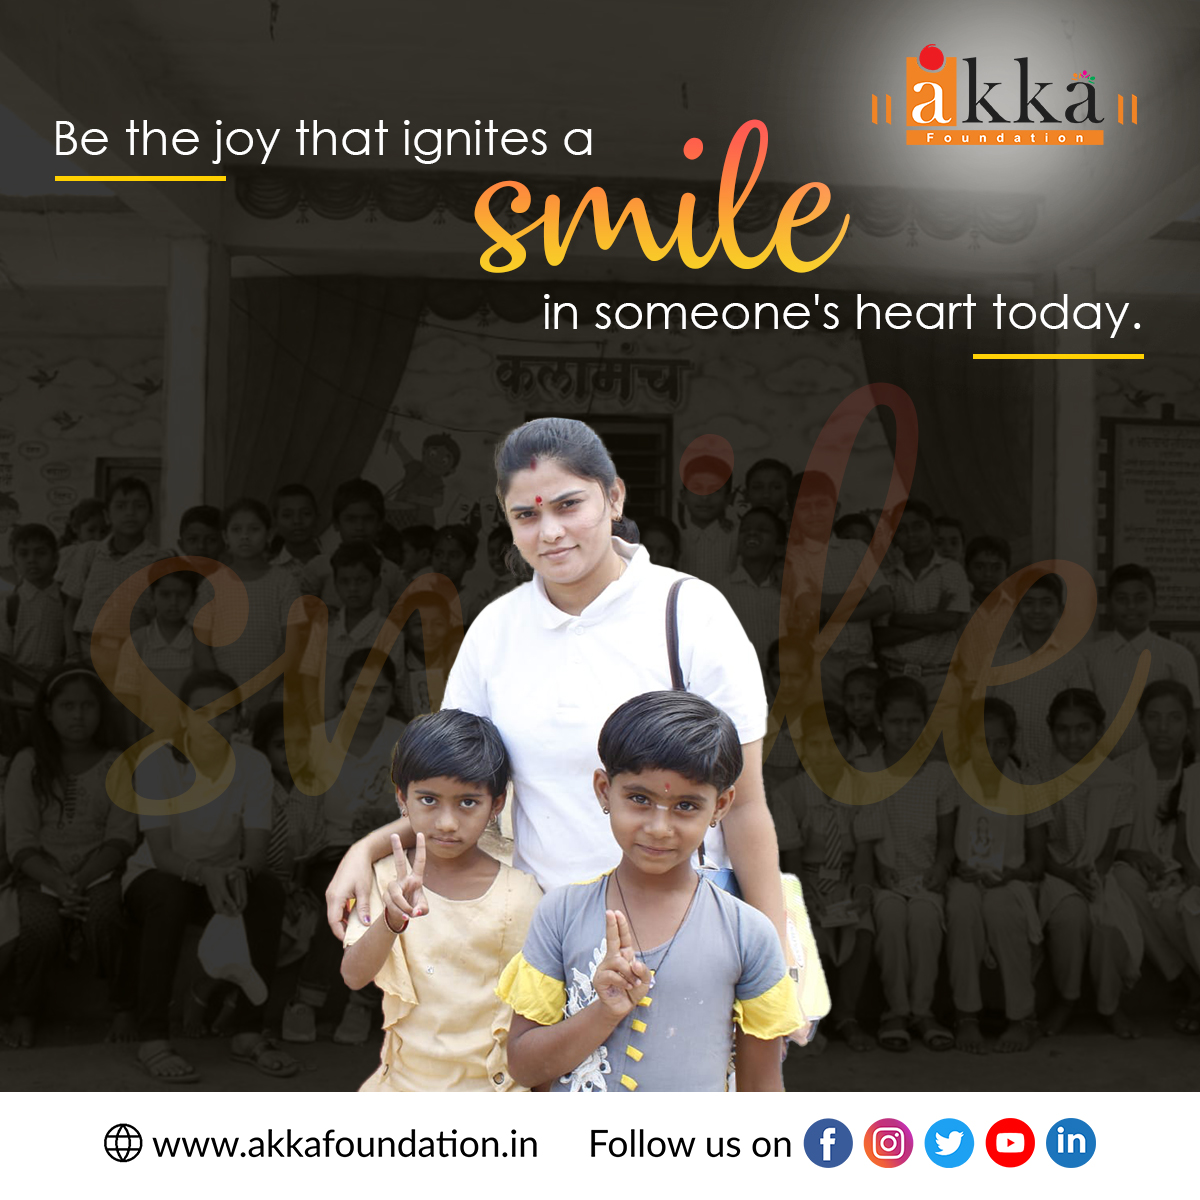 Be the joy that ignites a smile in someone's heart today.
Small role but Huge impact!!!
.
.
.
#AkkaFoundation #ProjectAnandi #Anandi #smile #smallrole #hugeimpact #menstruation #period #periods #periodstalk #hygiene #menstruationawareness #awareness #periodpain #latur #nilanga